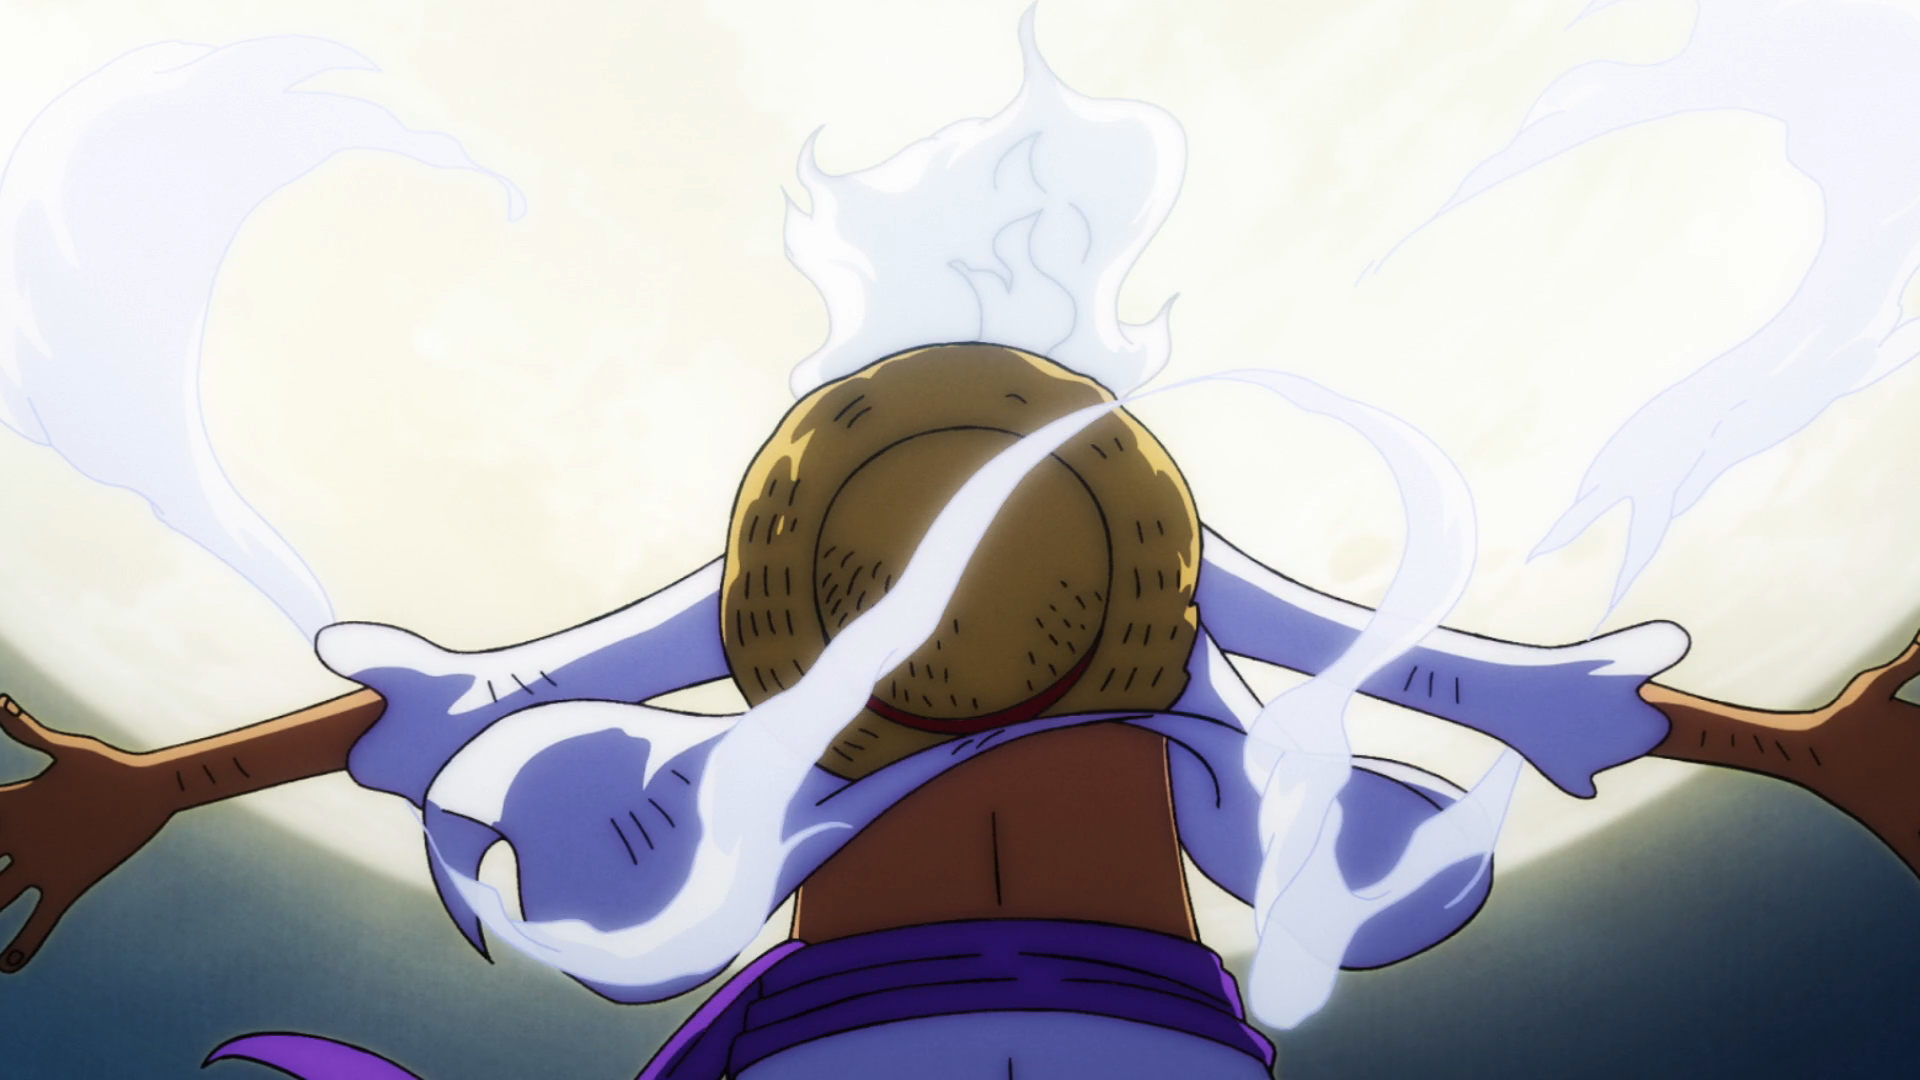 One Piece episode 1,071 is more than just a transformation for